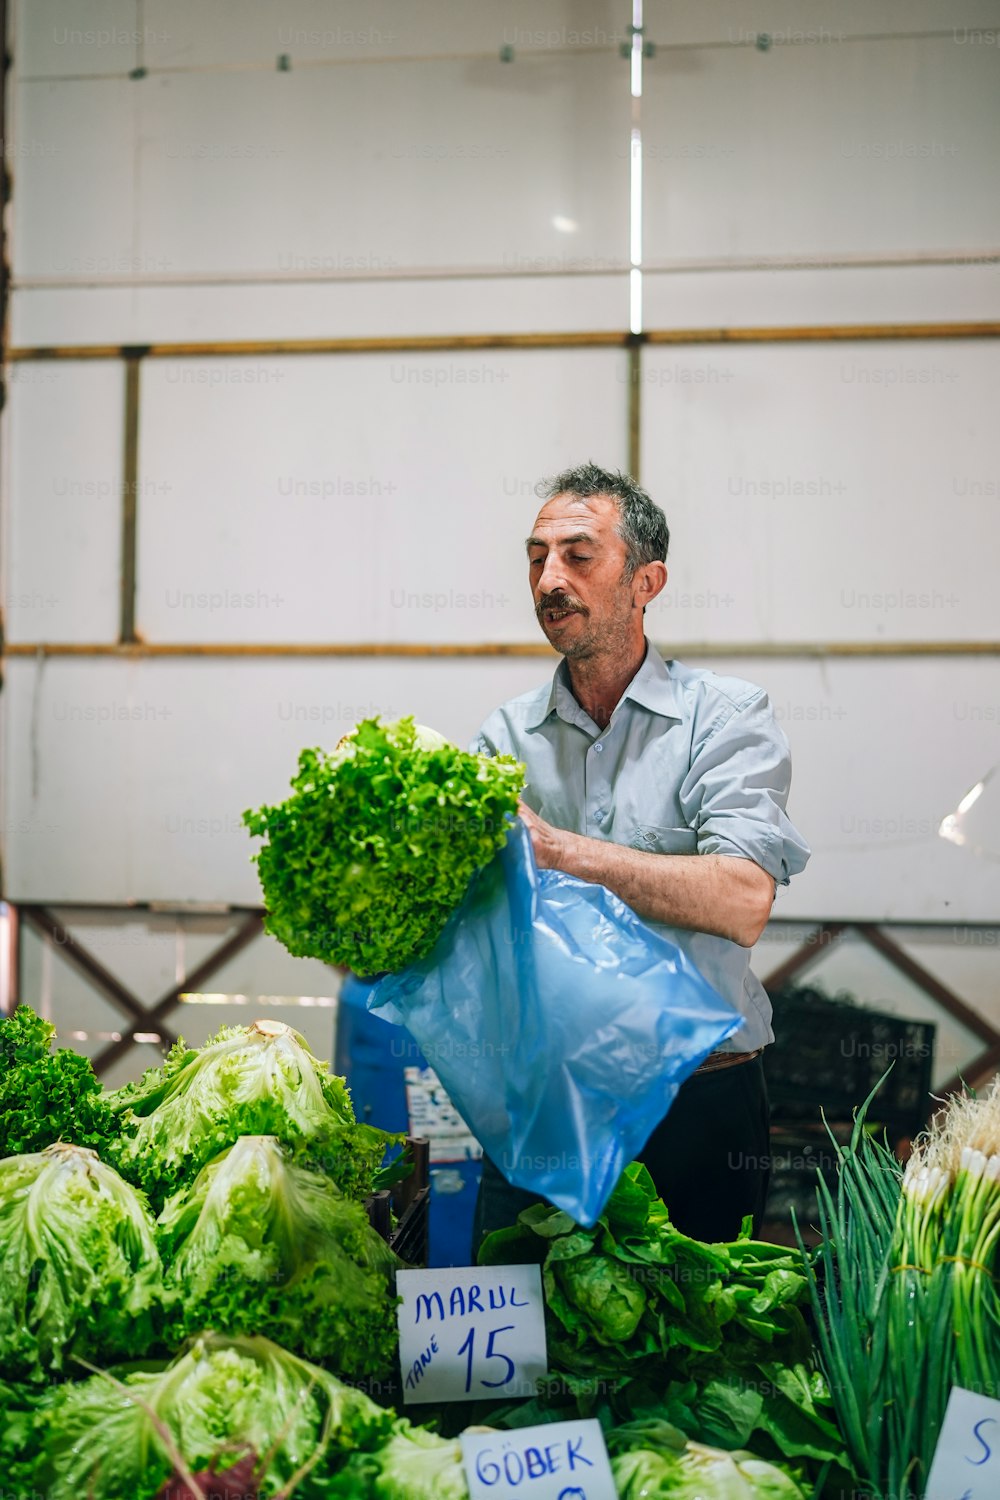 a man holding a bag of lettuce at a market